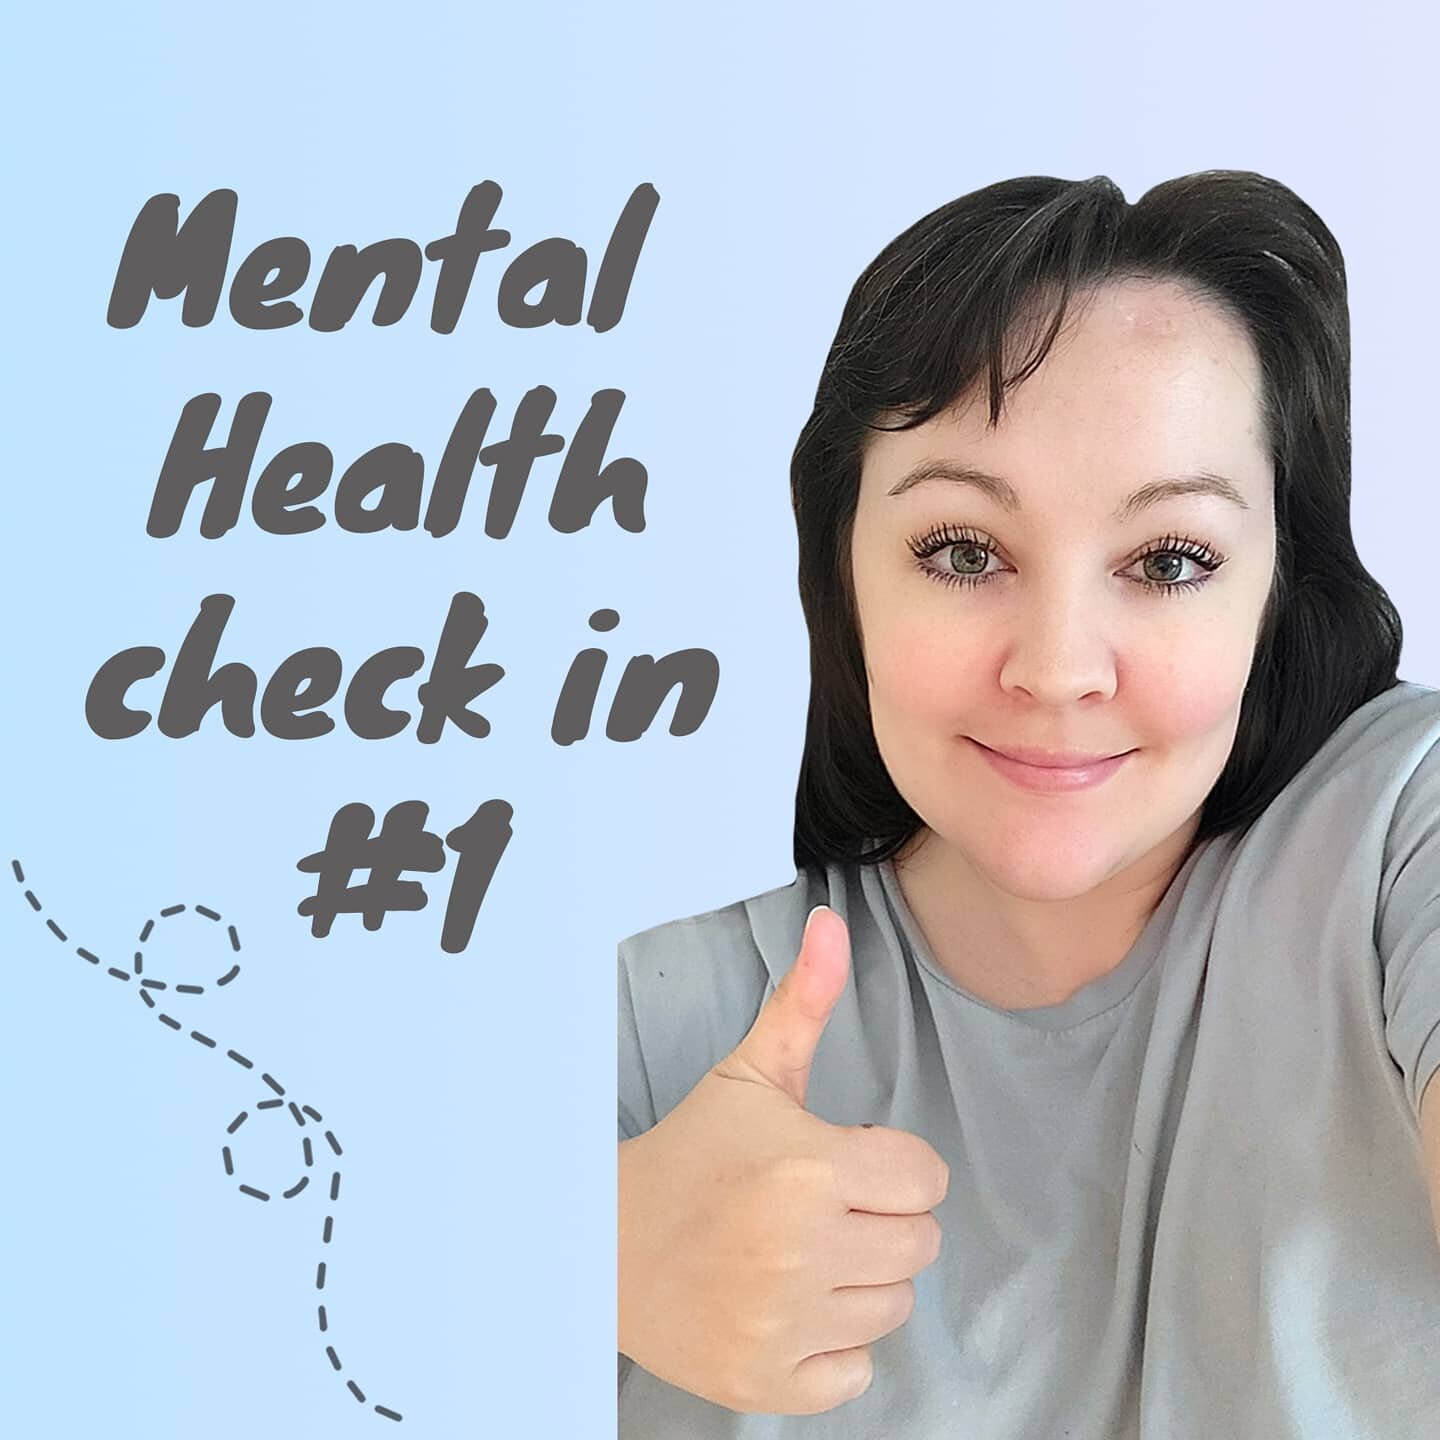 I thought we could try a new regular feature where I tell you where my mental health is at and you share the same in the comments. With our busy lives - or statically quiet ones due to ill health - we often don't take the time to voice out loud what'